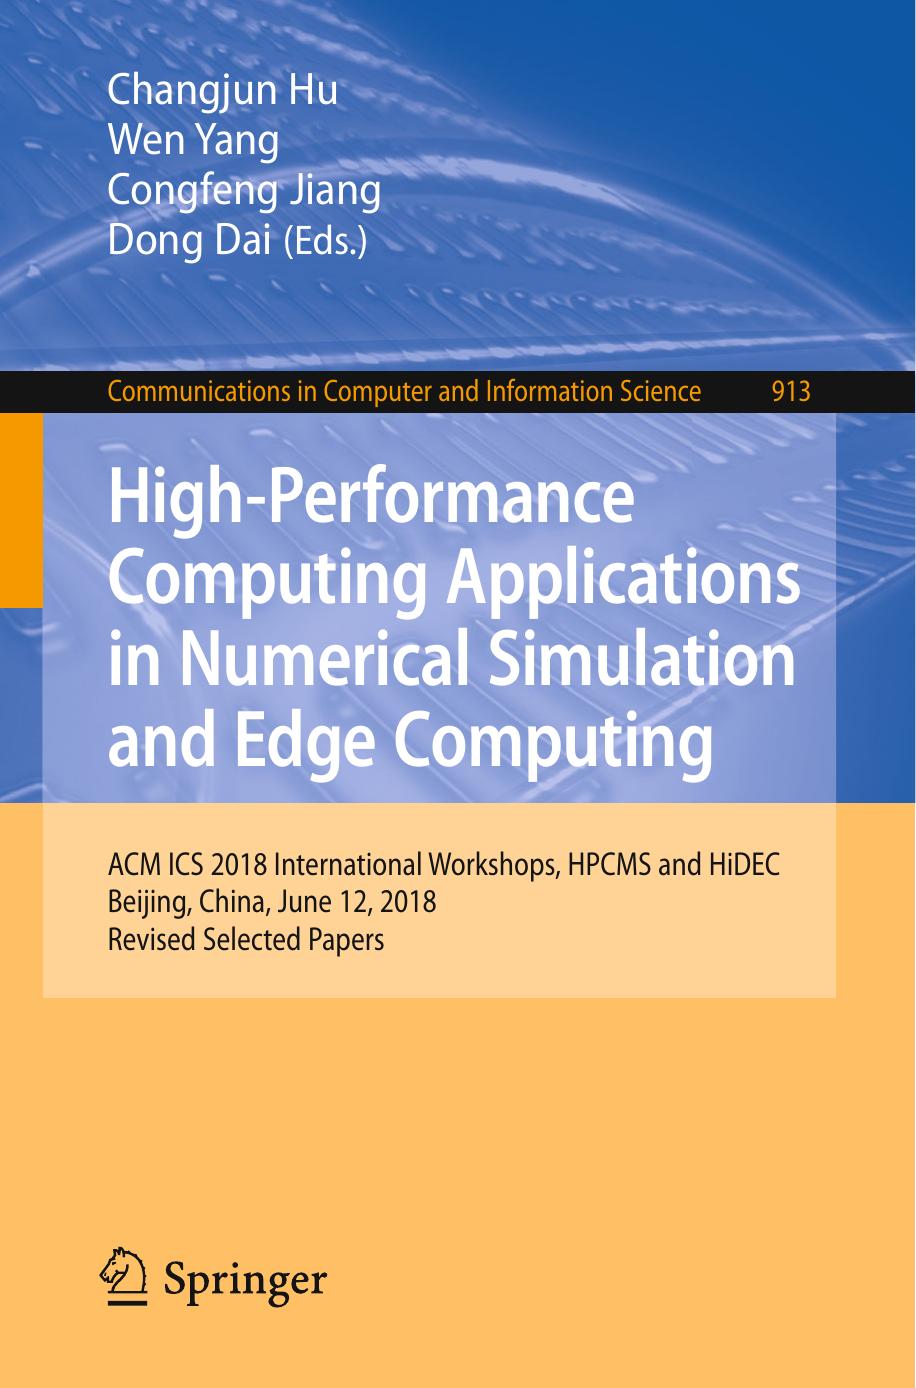 High-Performance Computing Applications in Numerical Simulation and Edge Computing: ACM ICS 2018 International Workshops, HPCMS and HiDEC, Beijing, China, June 12, 2018, Revised Selected Papers